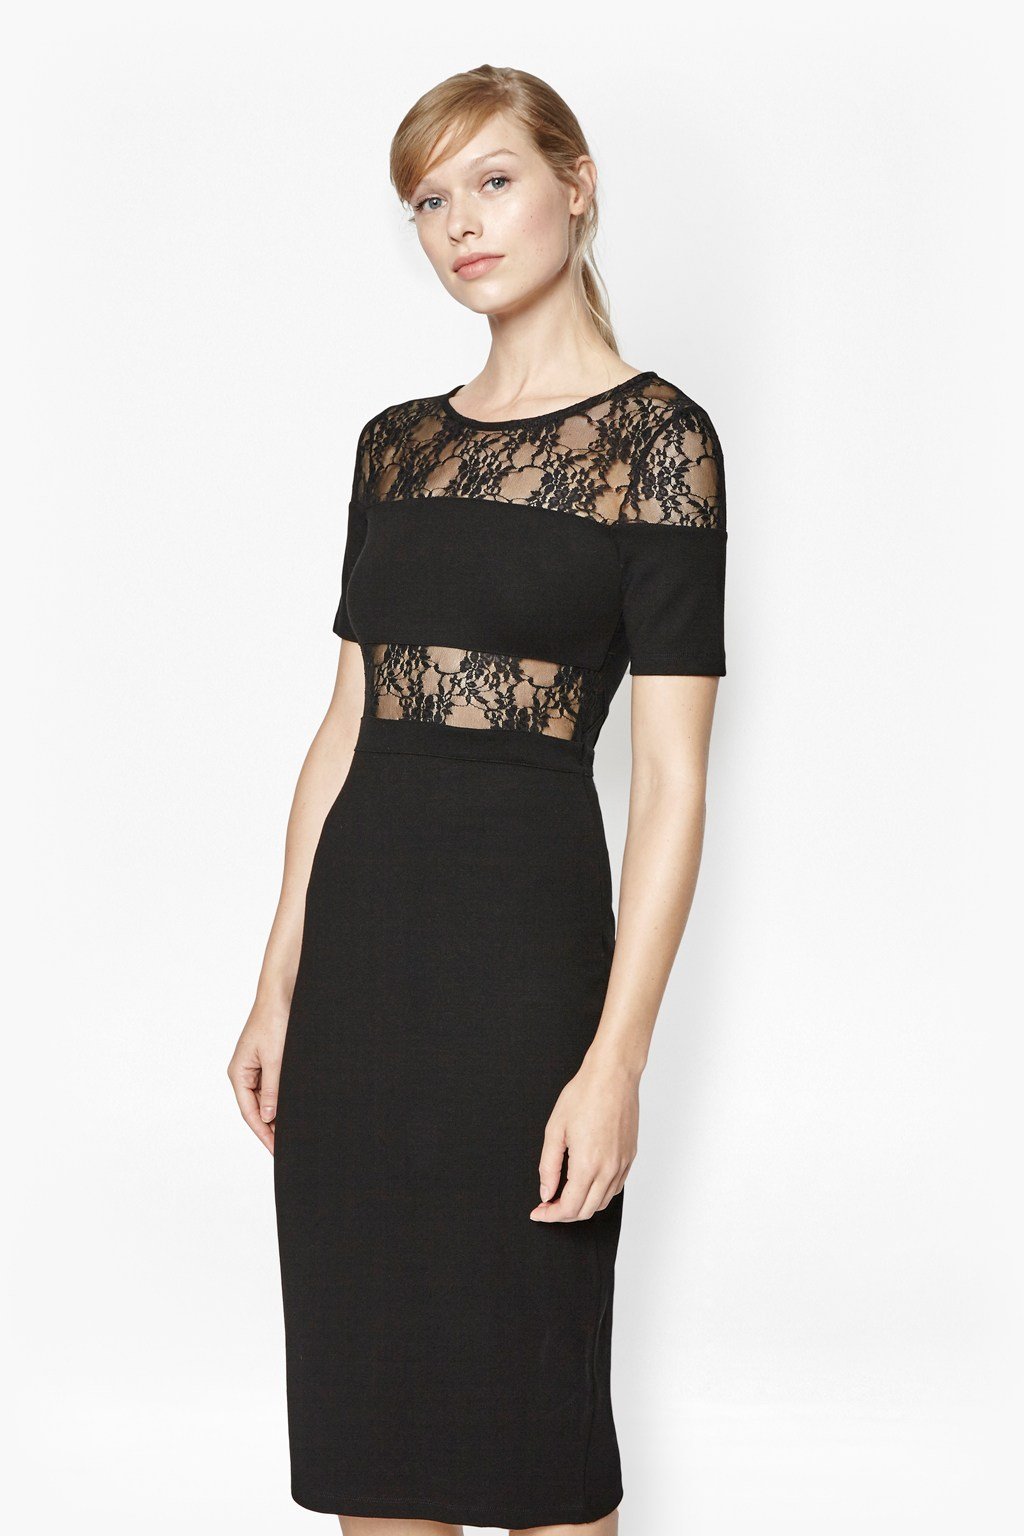 25 Lace Dresses - The Timeless Classic Styles You Will Love